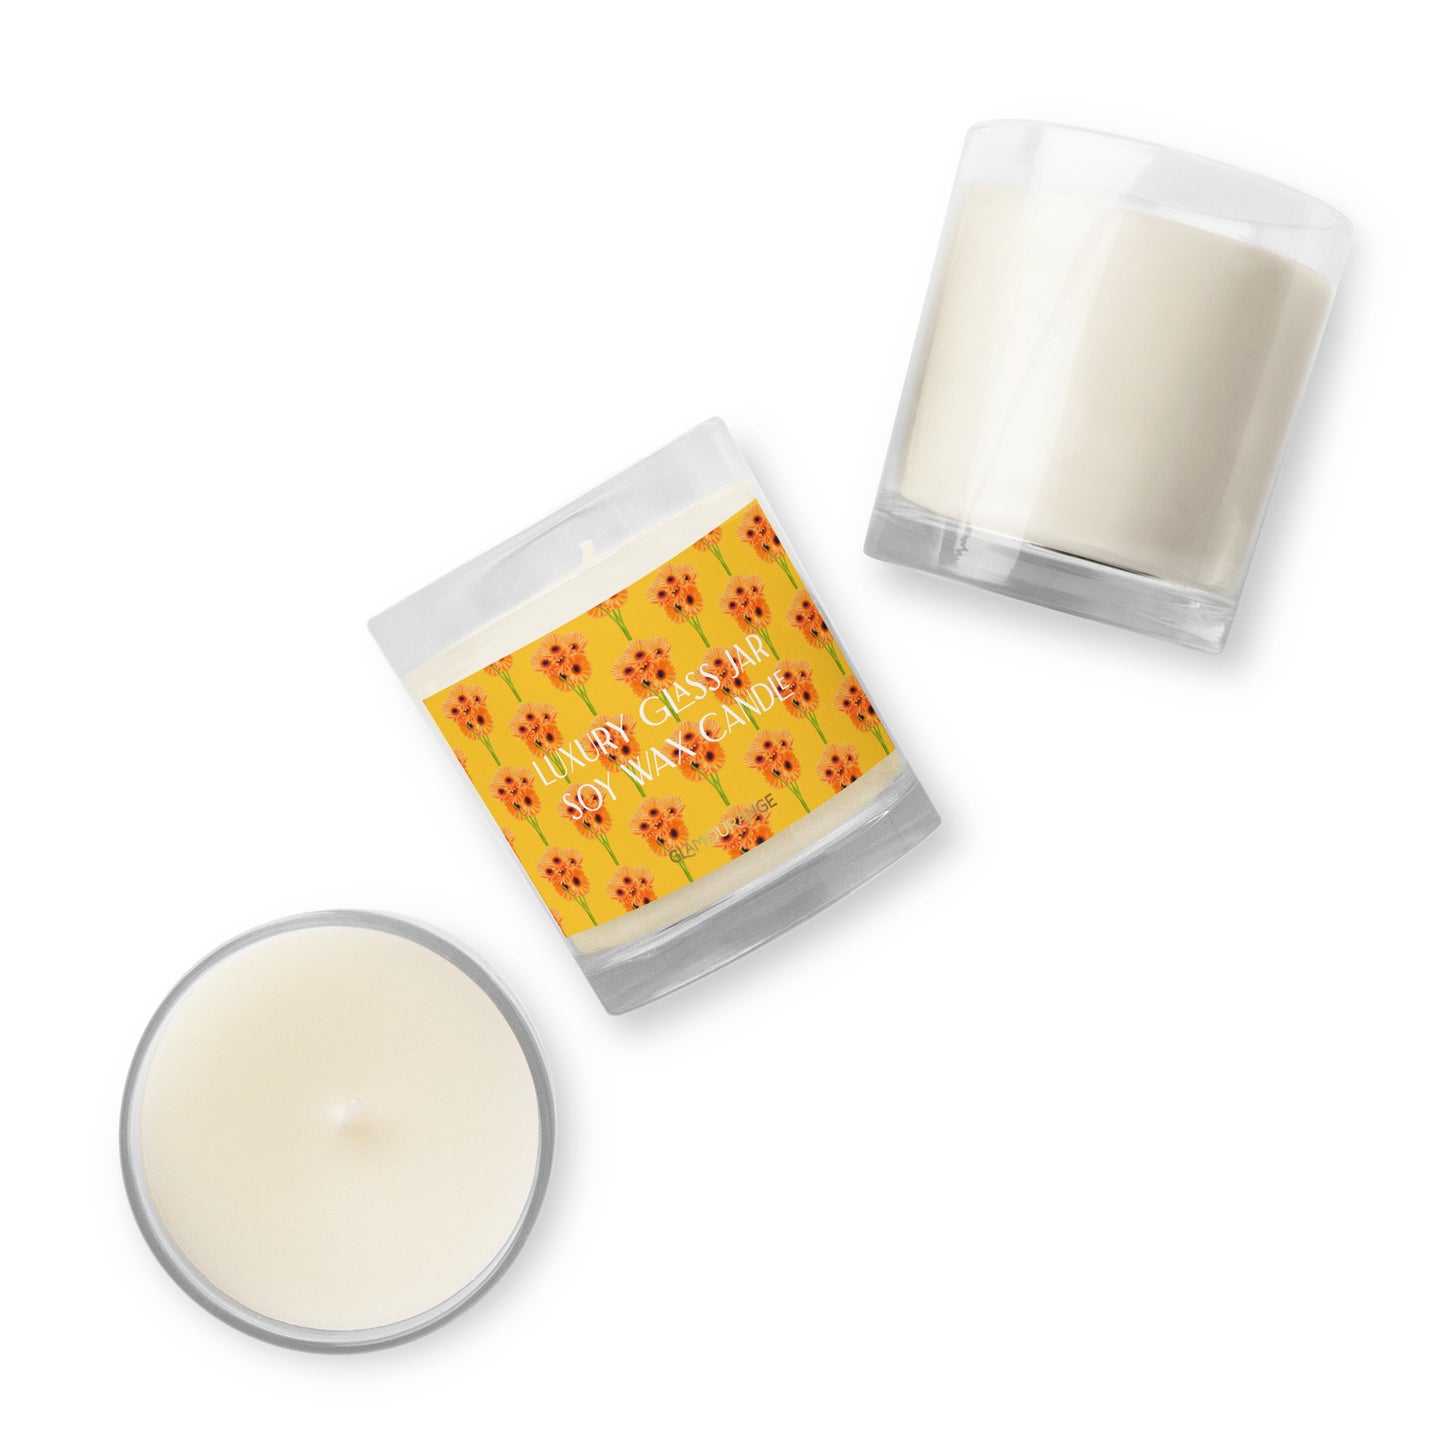 Glass Jar Soy Wax Candle (Calming Vivid Nature - Label 0028)